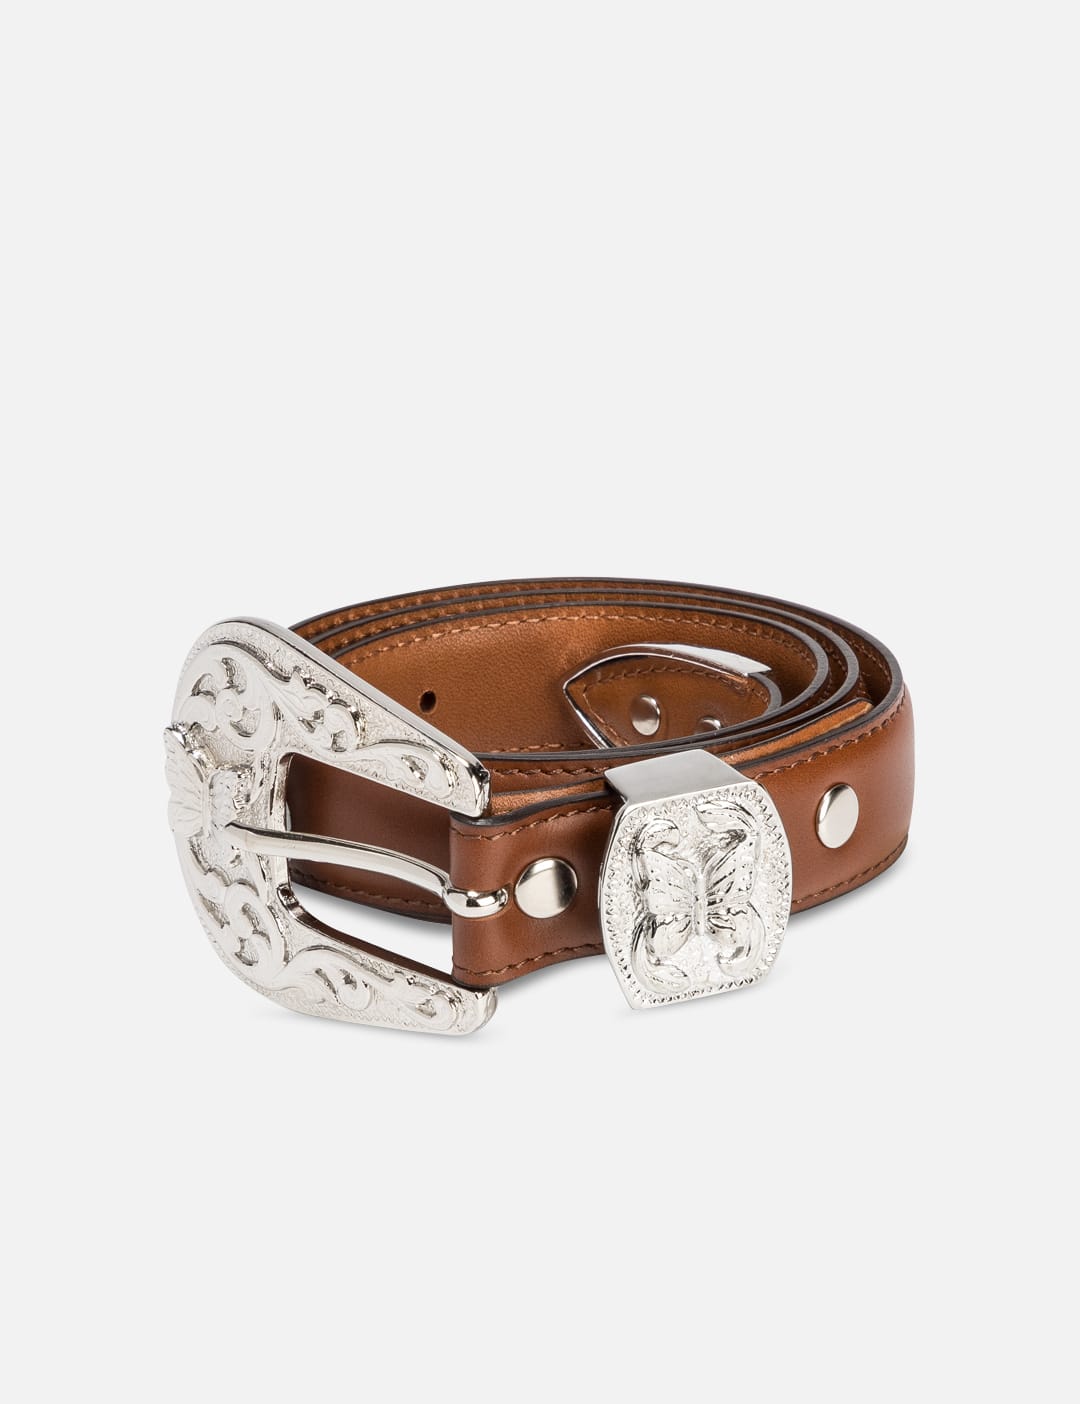 Needles - Papillon Western Tip Belt | HBX - Globally Curated